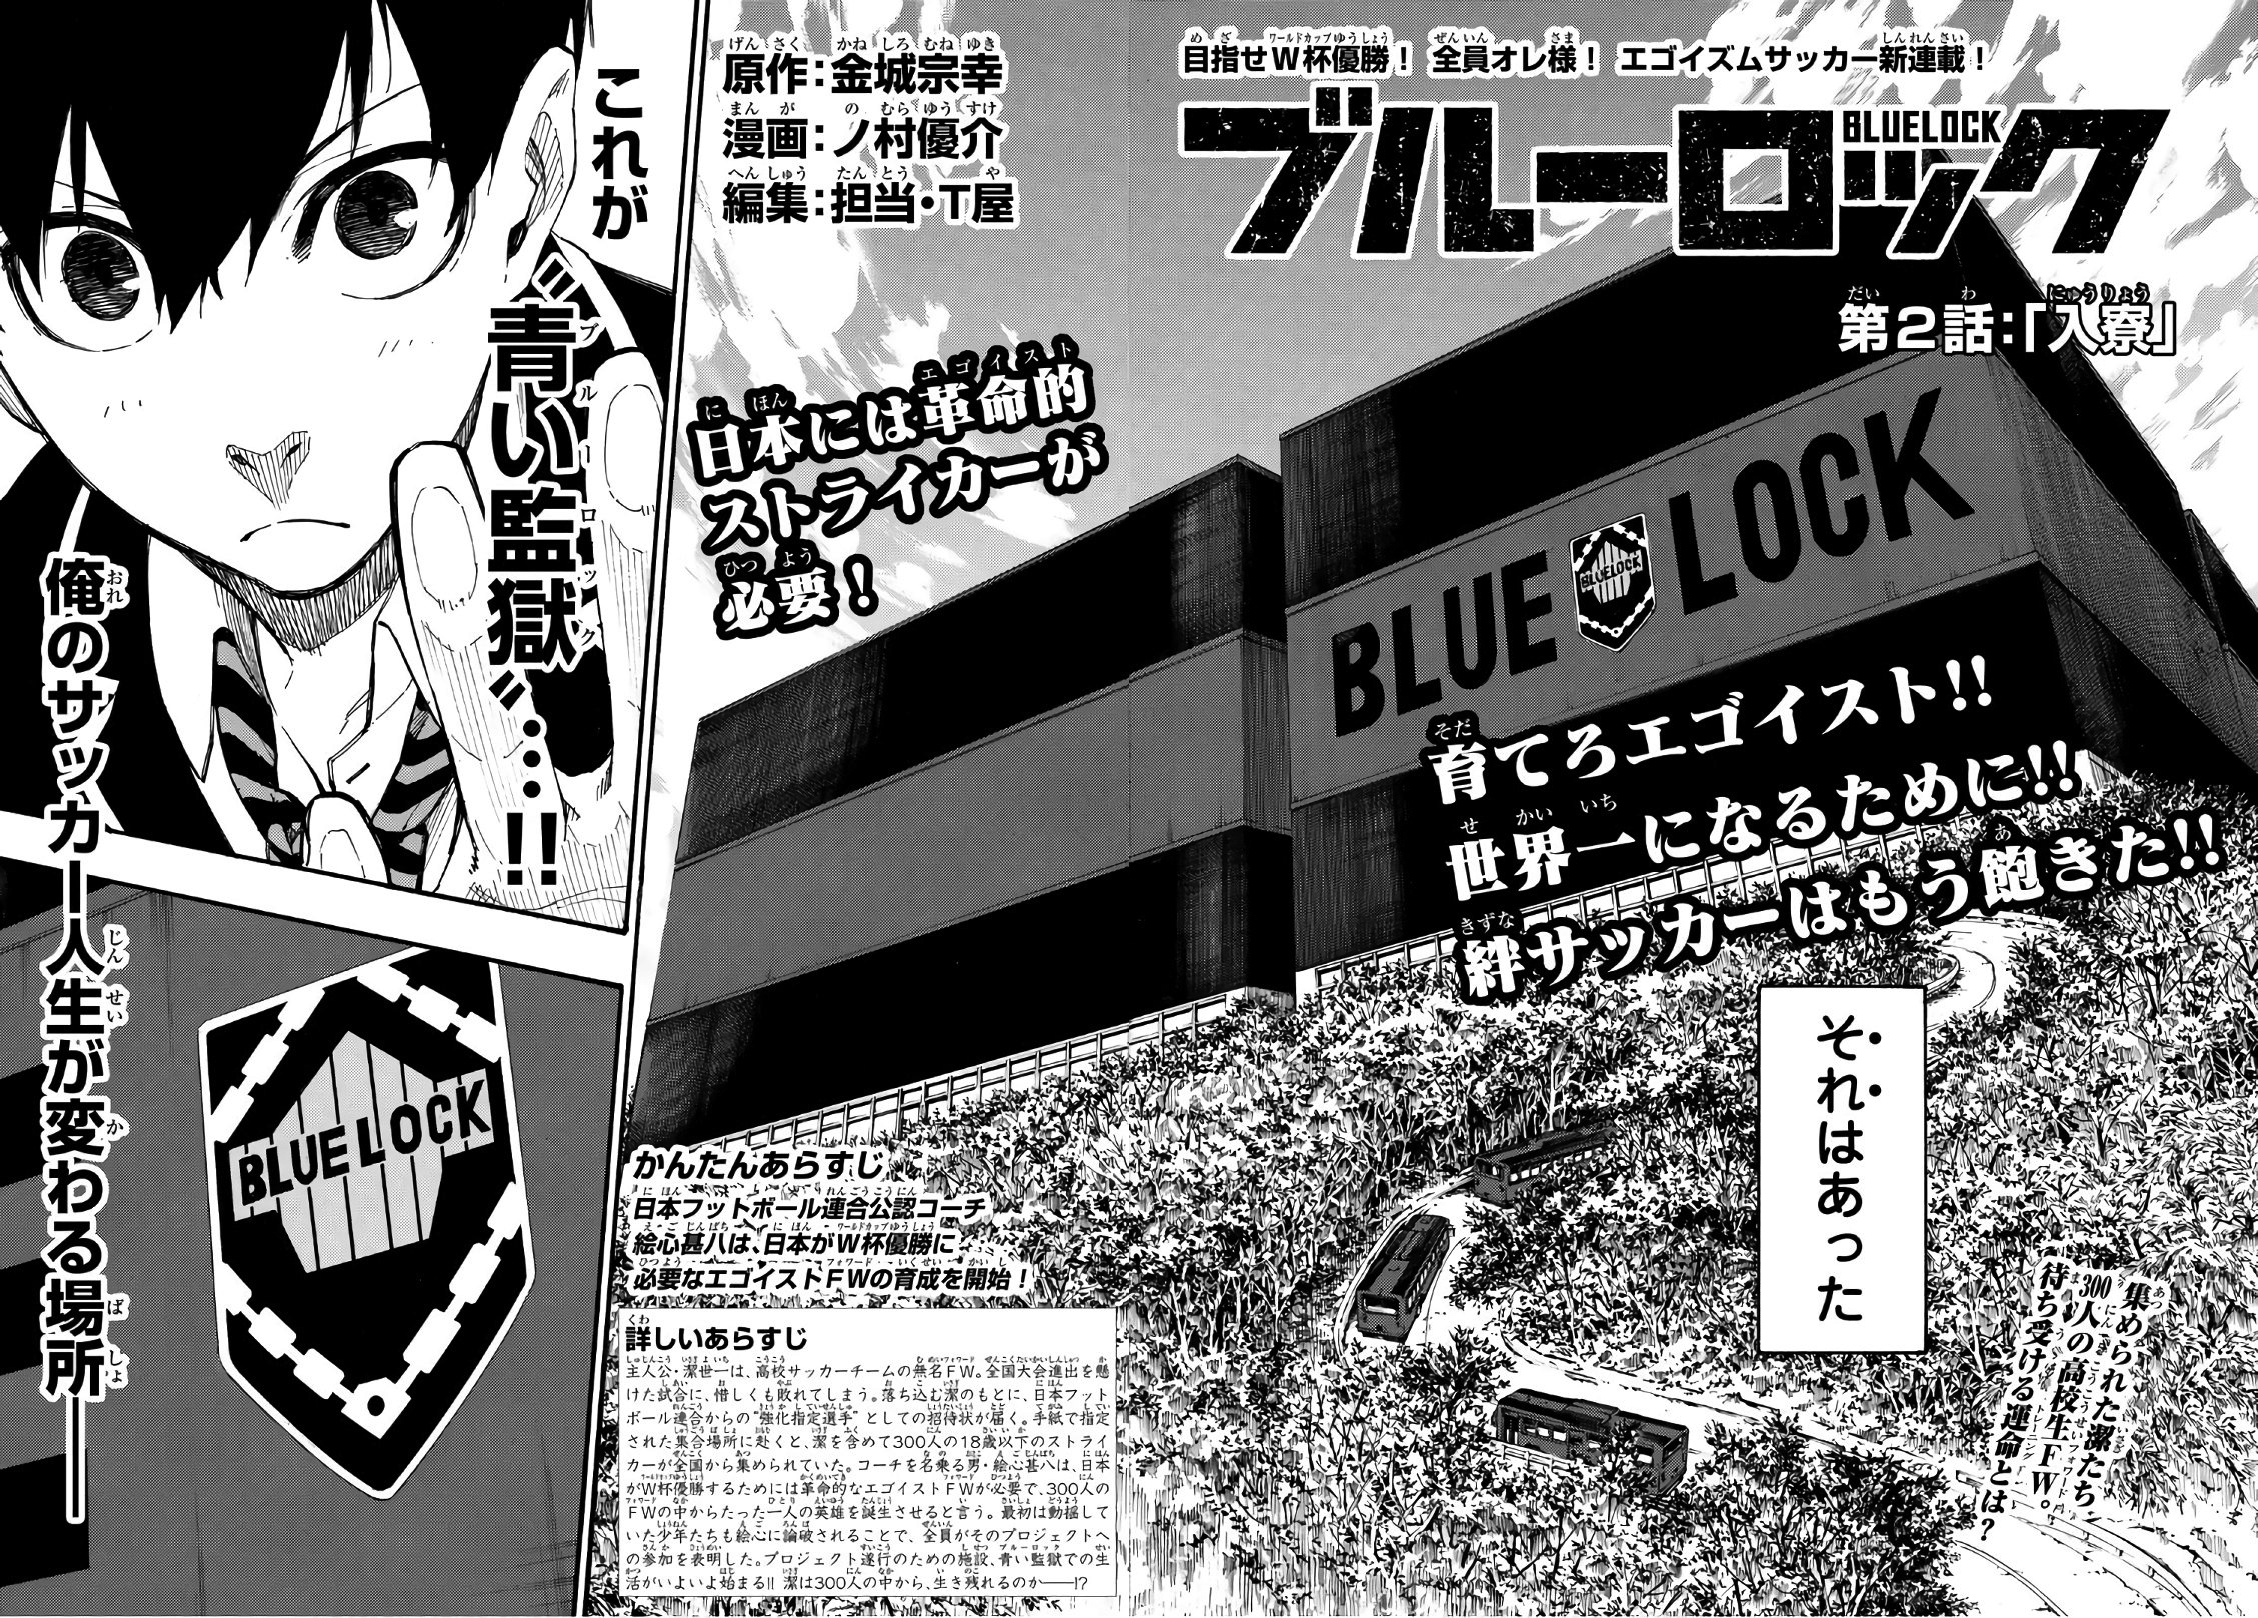 Blue Lock episode 2 release time, date and recap explained